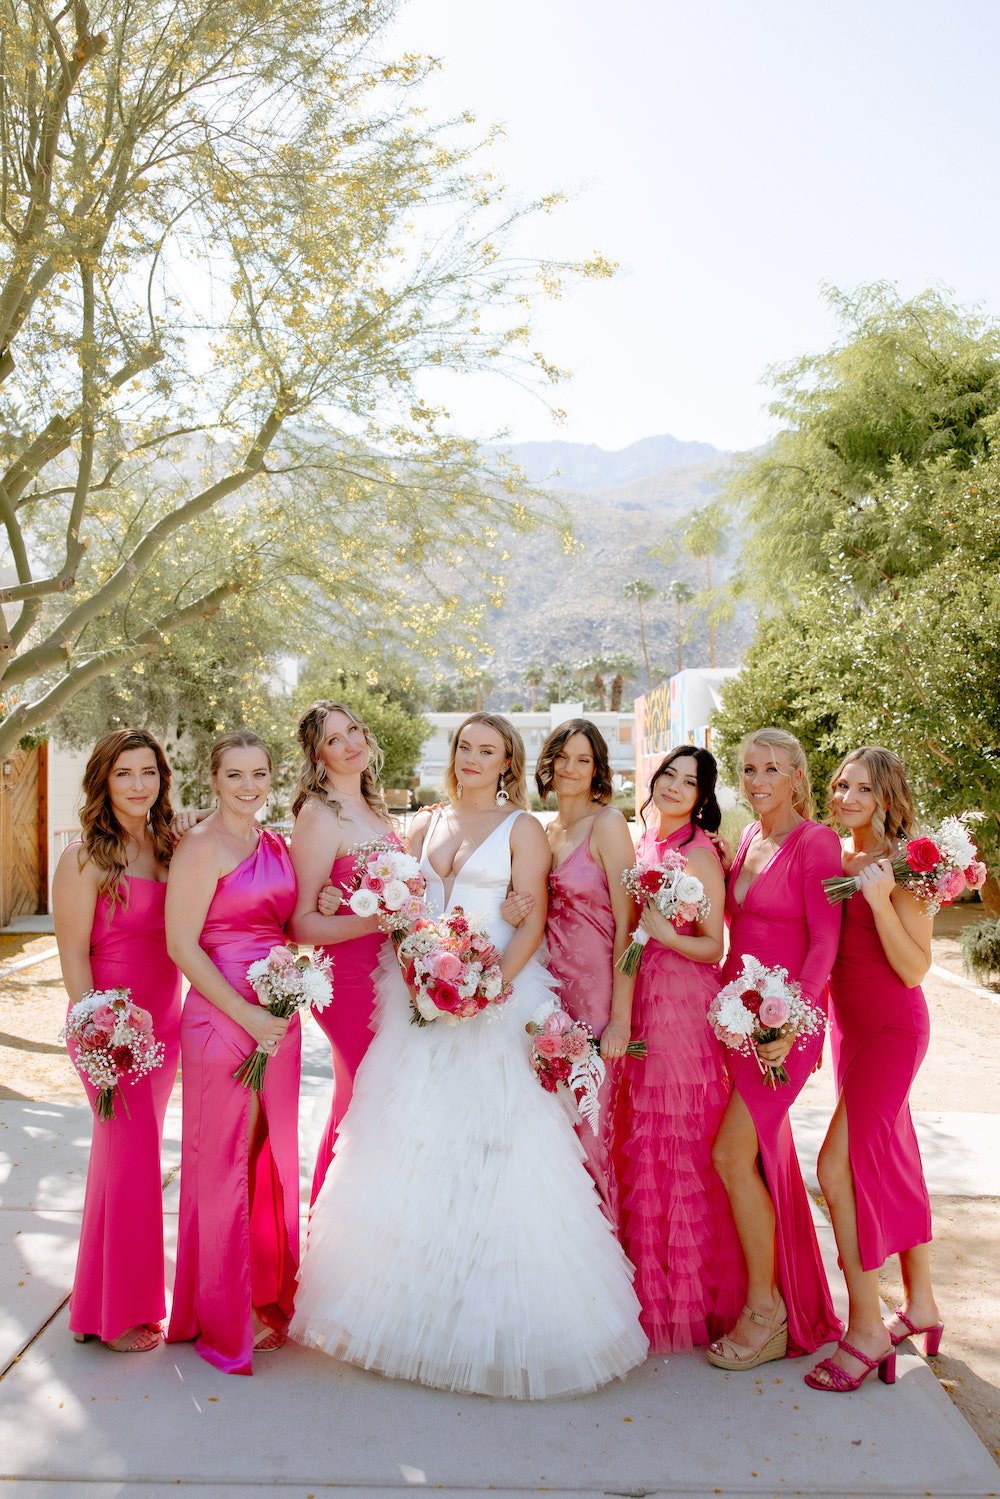 Hot pink barbie dream wedding bridesmaid portrait at The Ace Hotel Palm Springs.